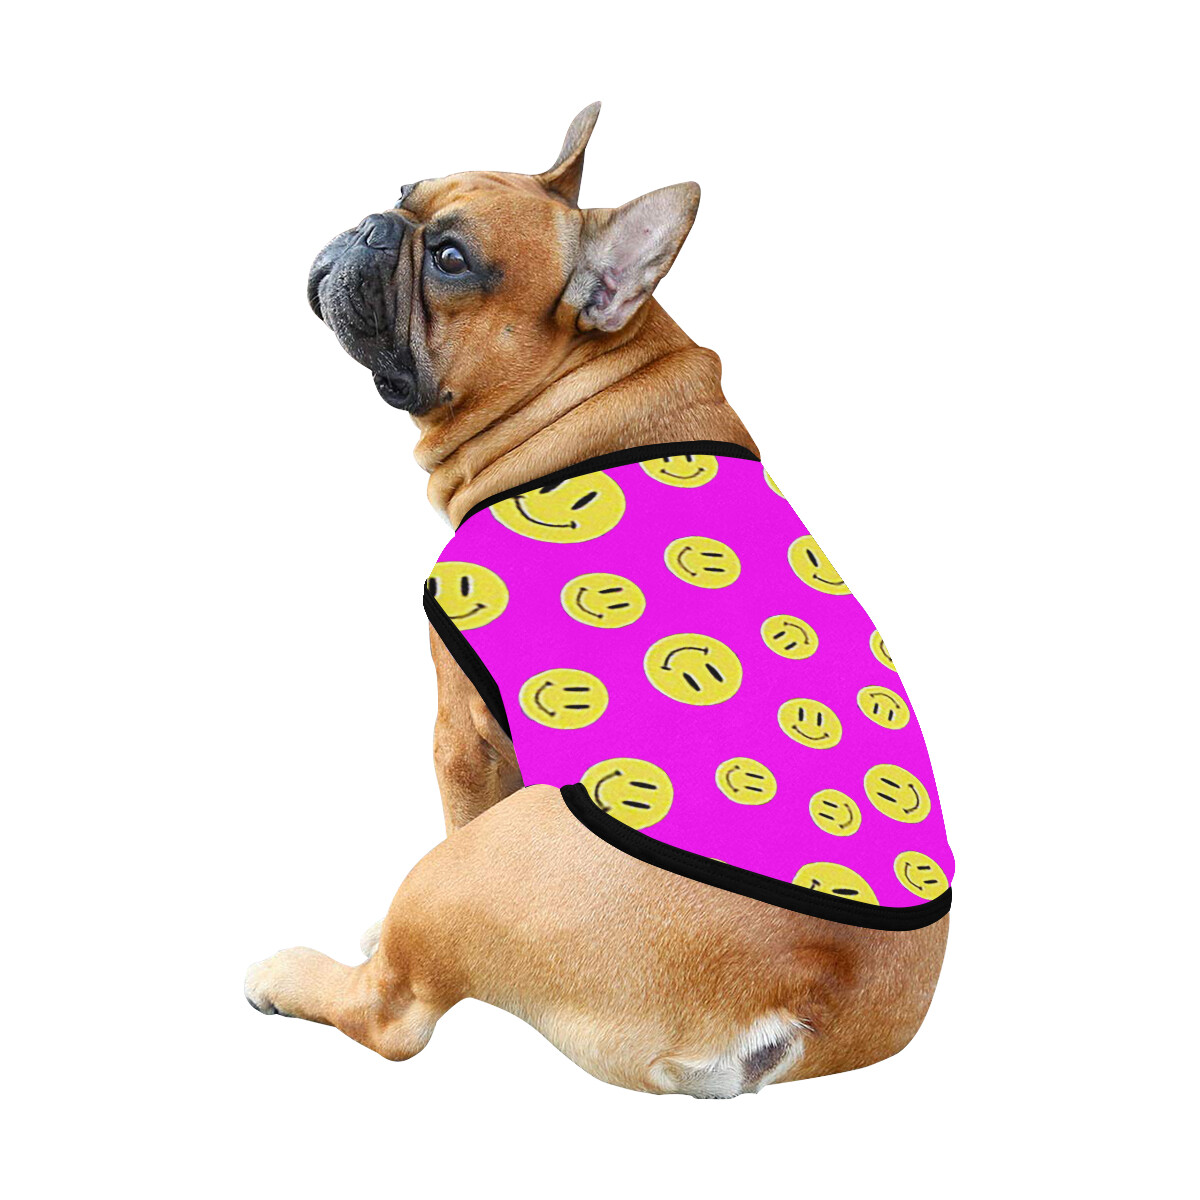 🐕 Happy faces Dog Tank Top, Dog shirt, Dog clothes, Gifts, front back print, 7 sizes XS to 3XL, dog t-shirt, dog t-shirt, dog gift, fuchsia